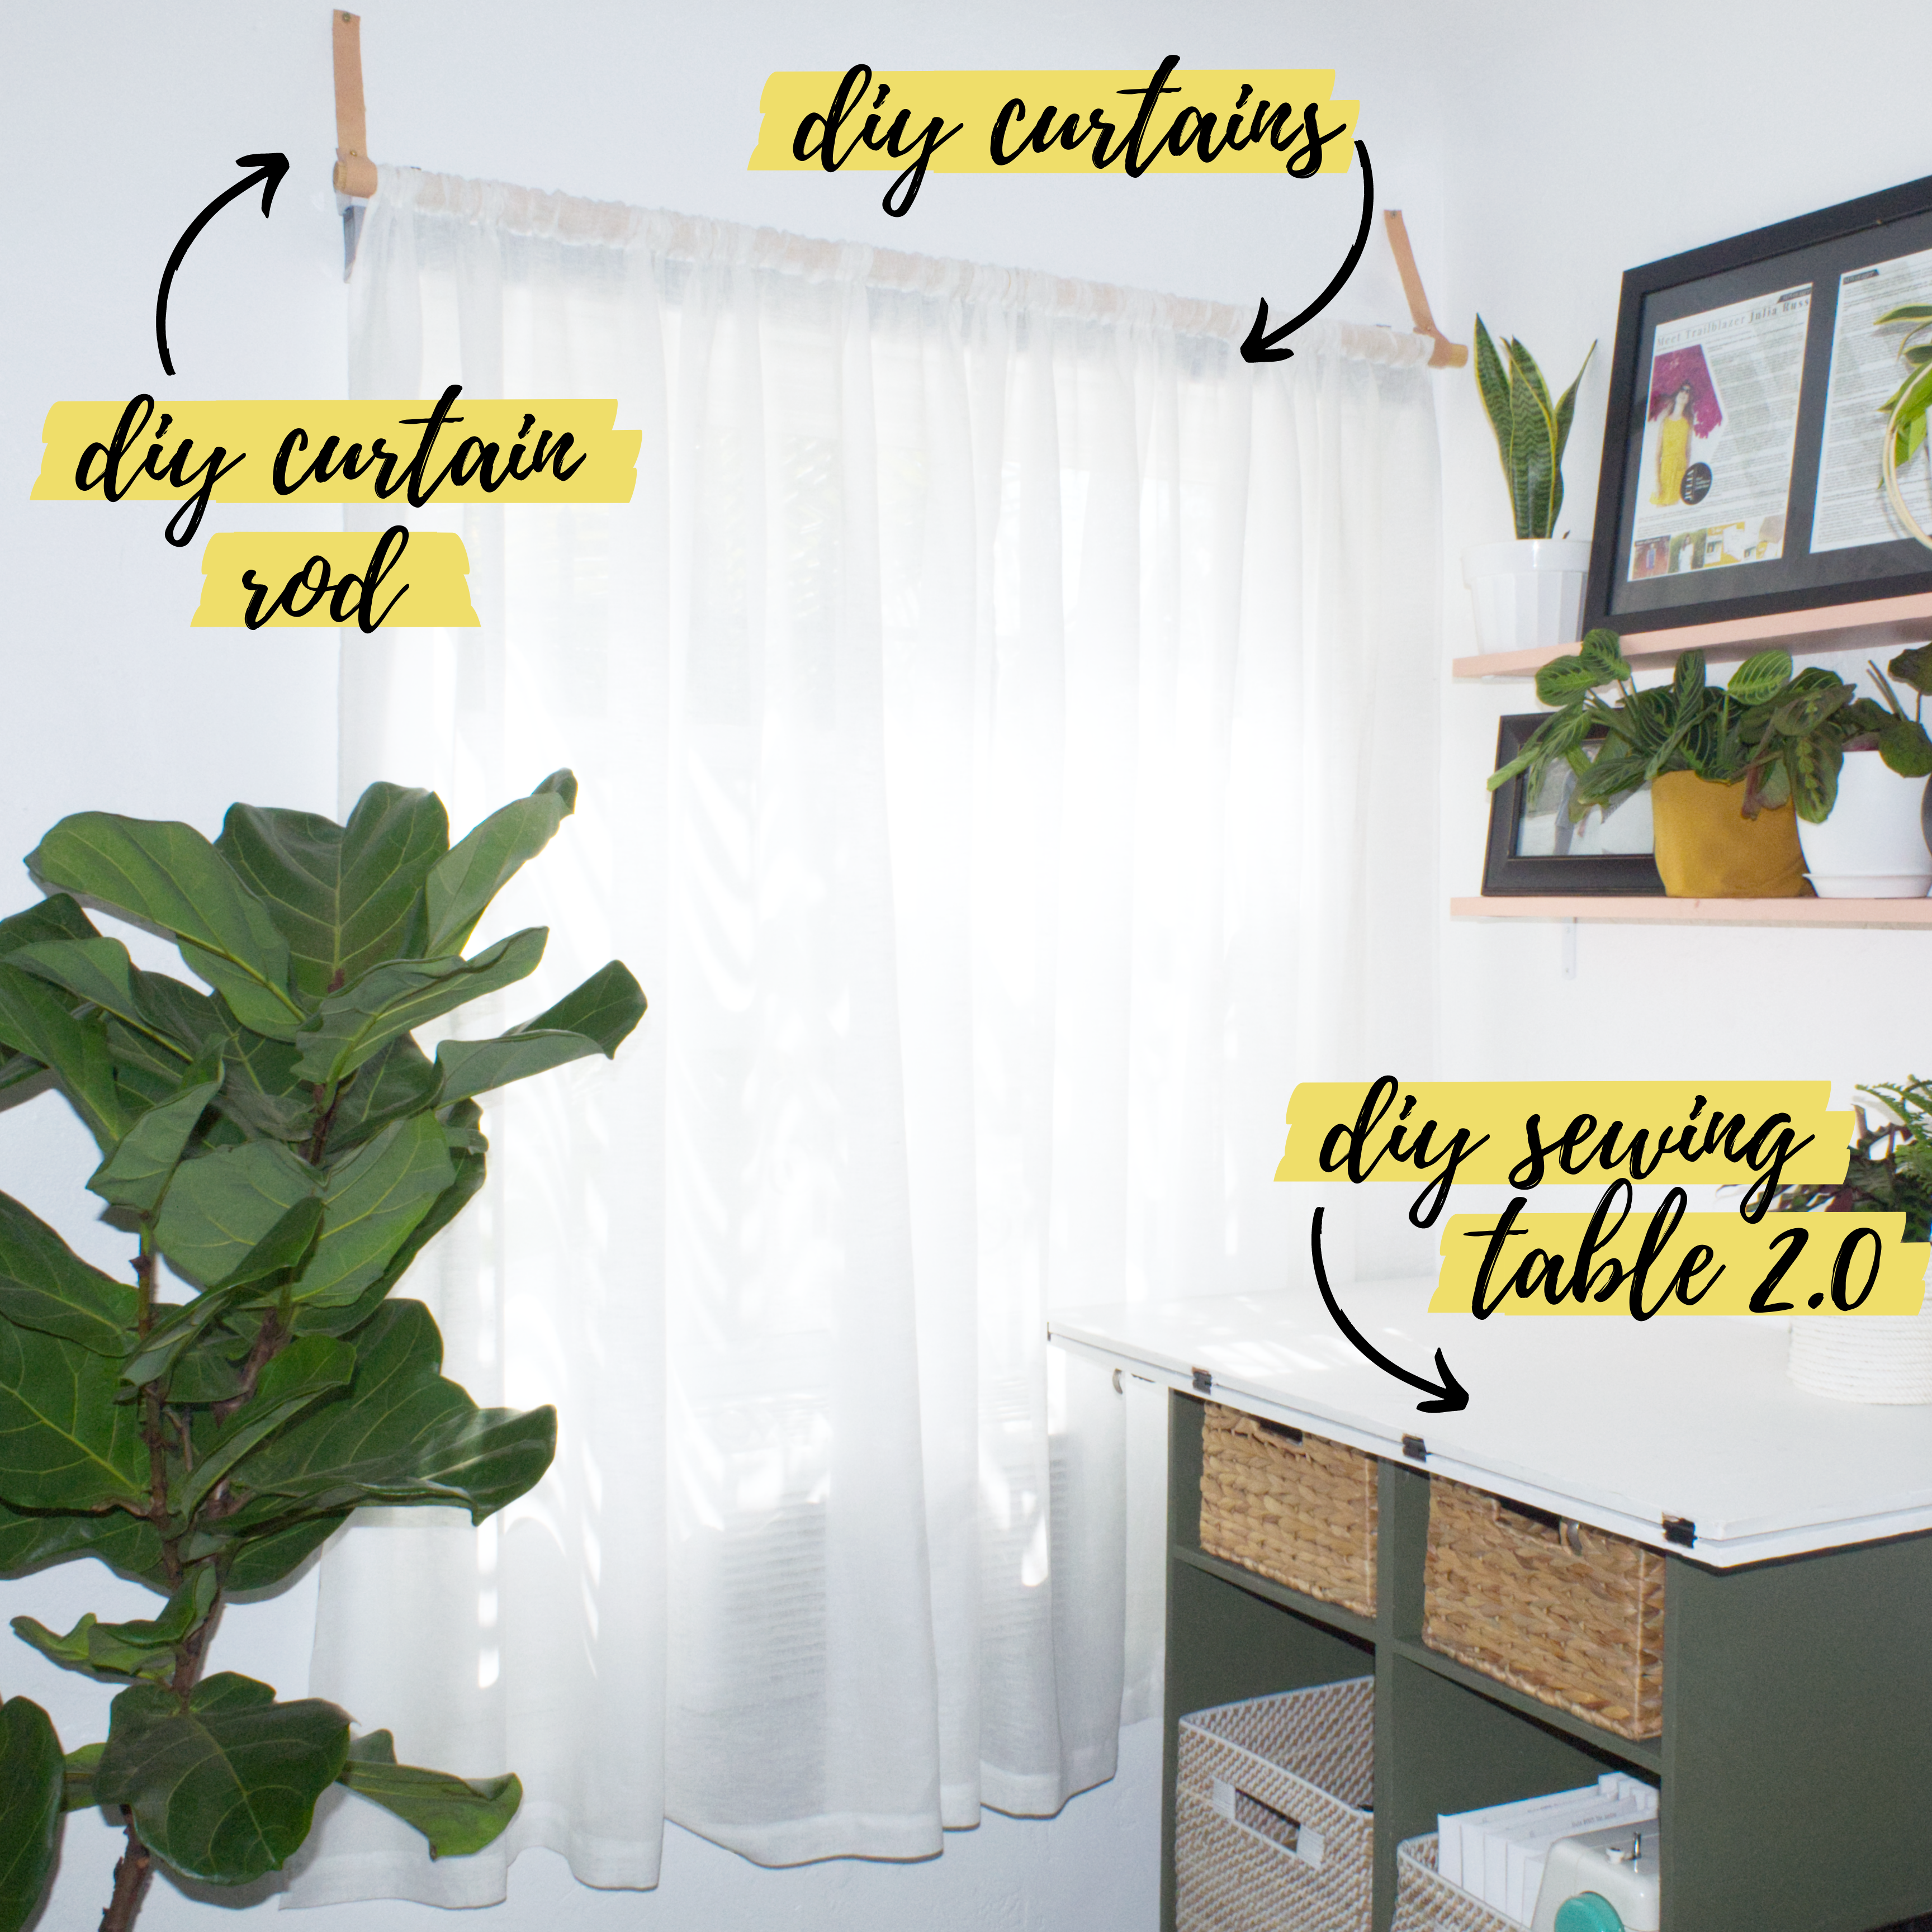 How to sew easy curtains DIY sewing tutorial: Overview of sewing space DIY projects